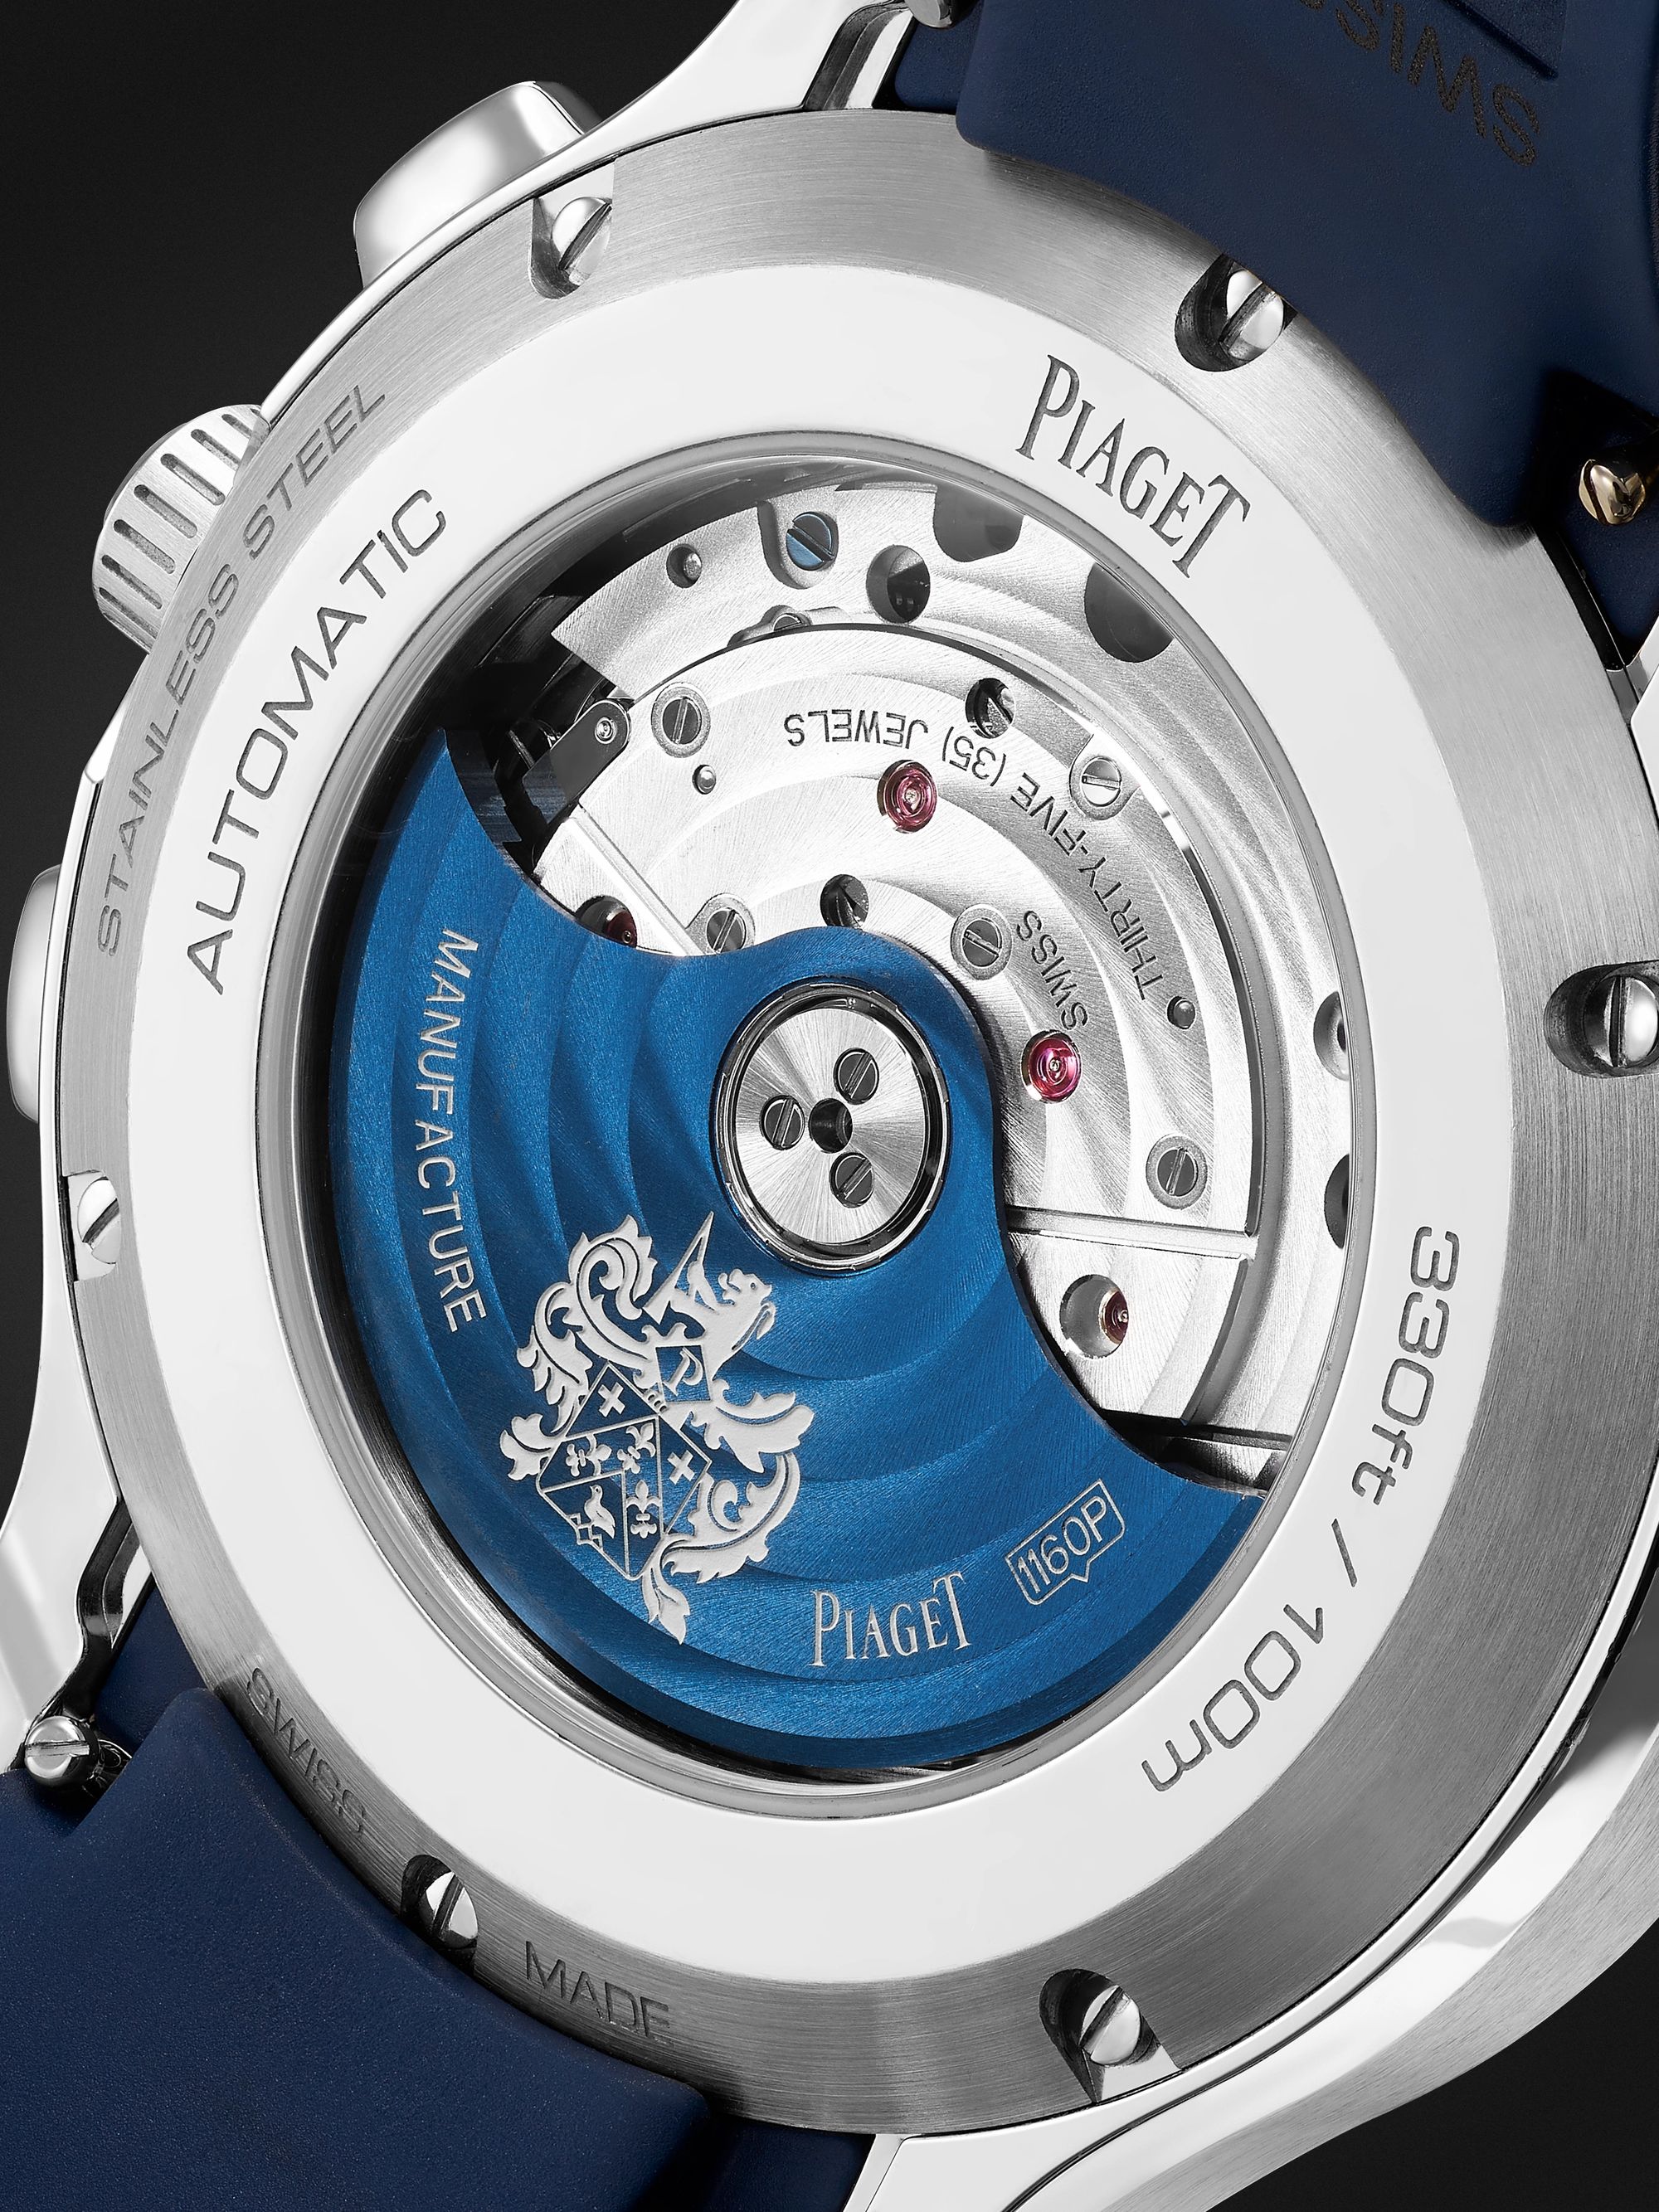 PIAGET Polo Automatic Chronograph 42mm Stainless Steel and Rubber Watch, Ref. No. G0A46013